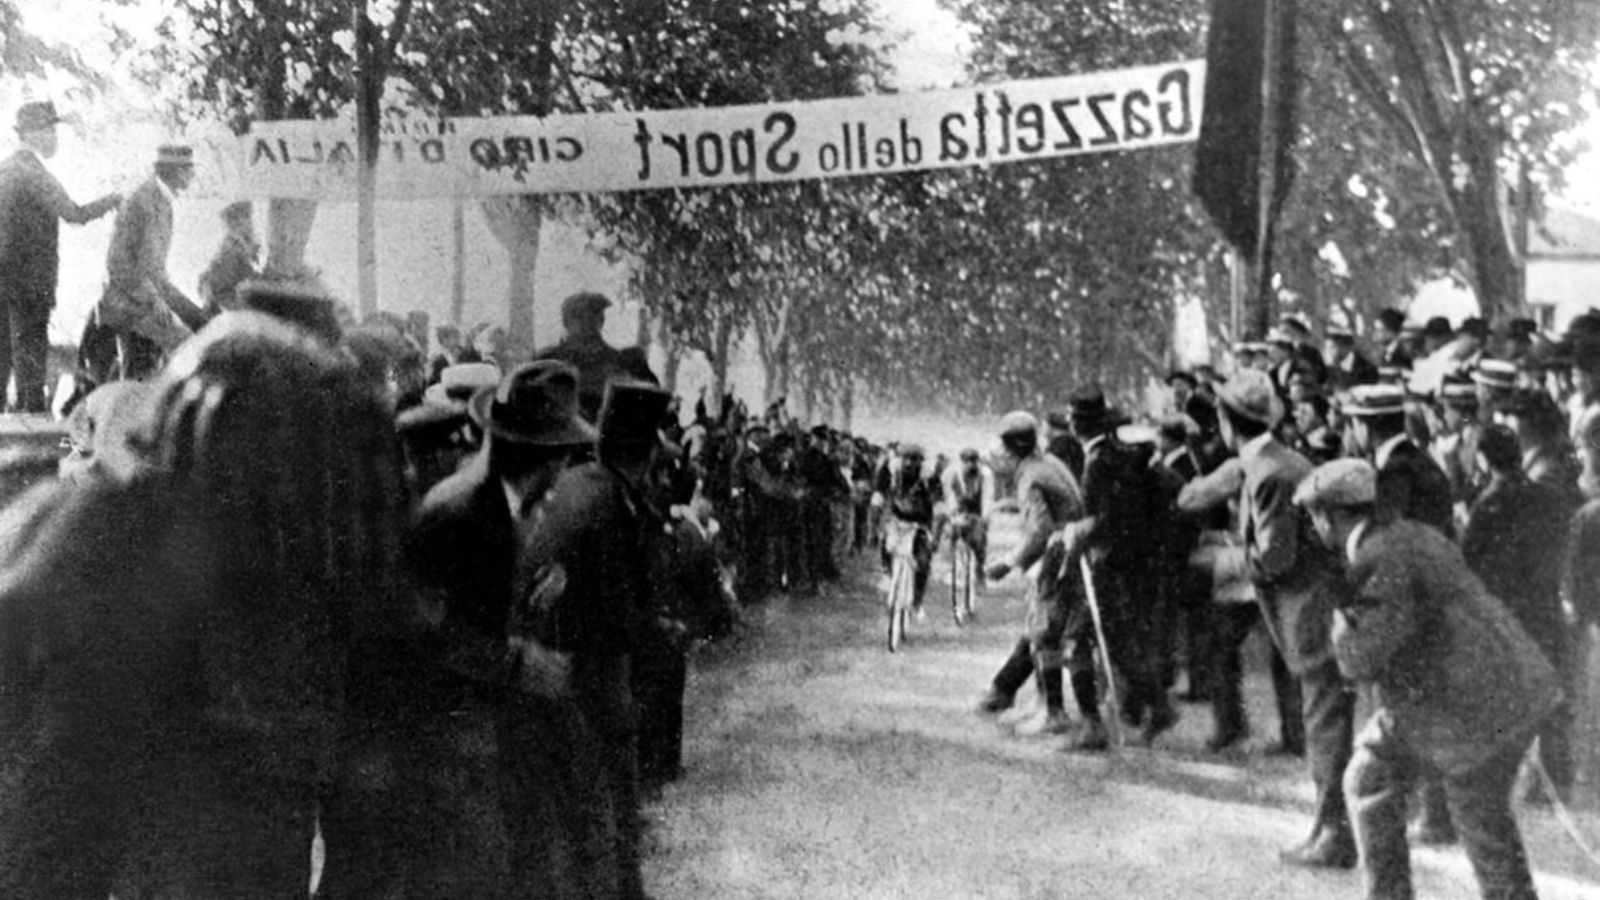 two cyclists arrive among cheering crowd at the very first Giro d'Italia in 1909